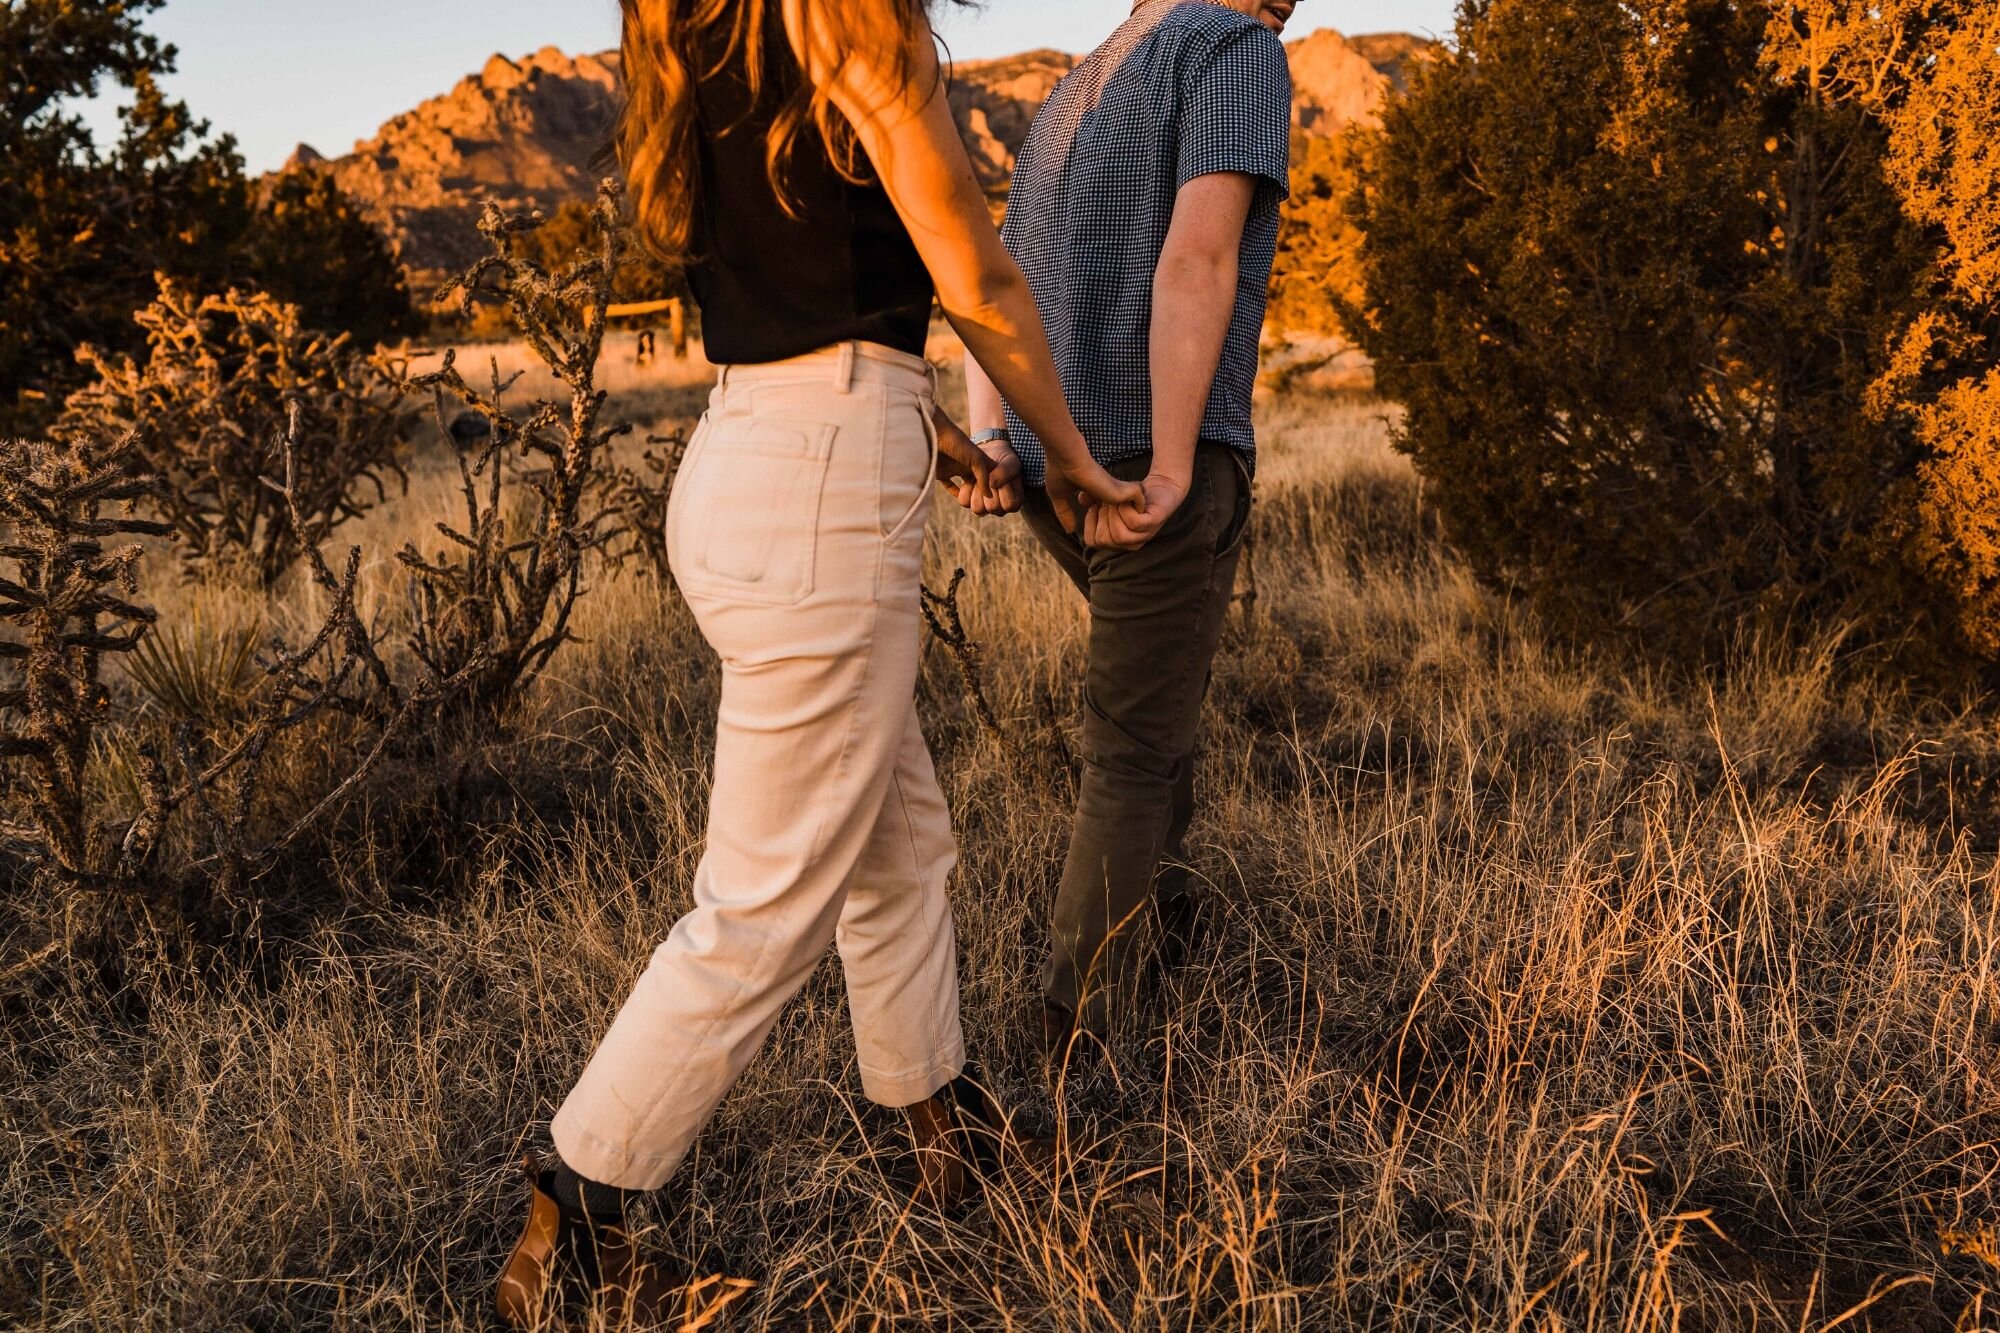 High Desert Couples Session in Albuquerque, New Mexico | Between the Pine Adventure Elopement and Wedding Photography